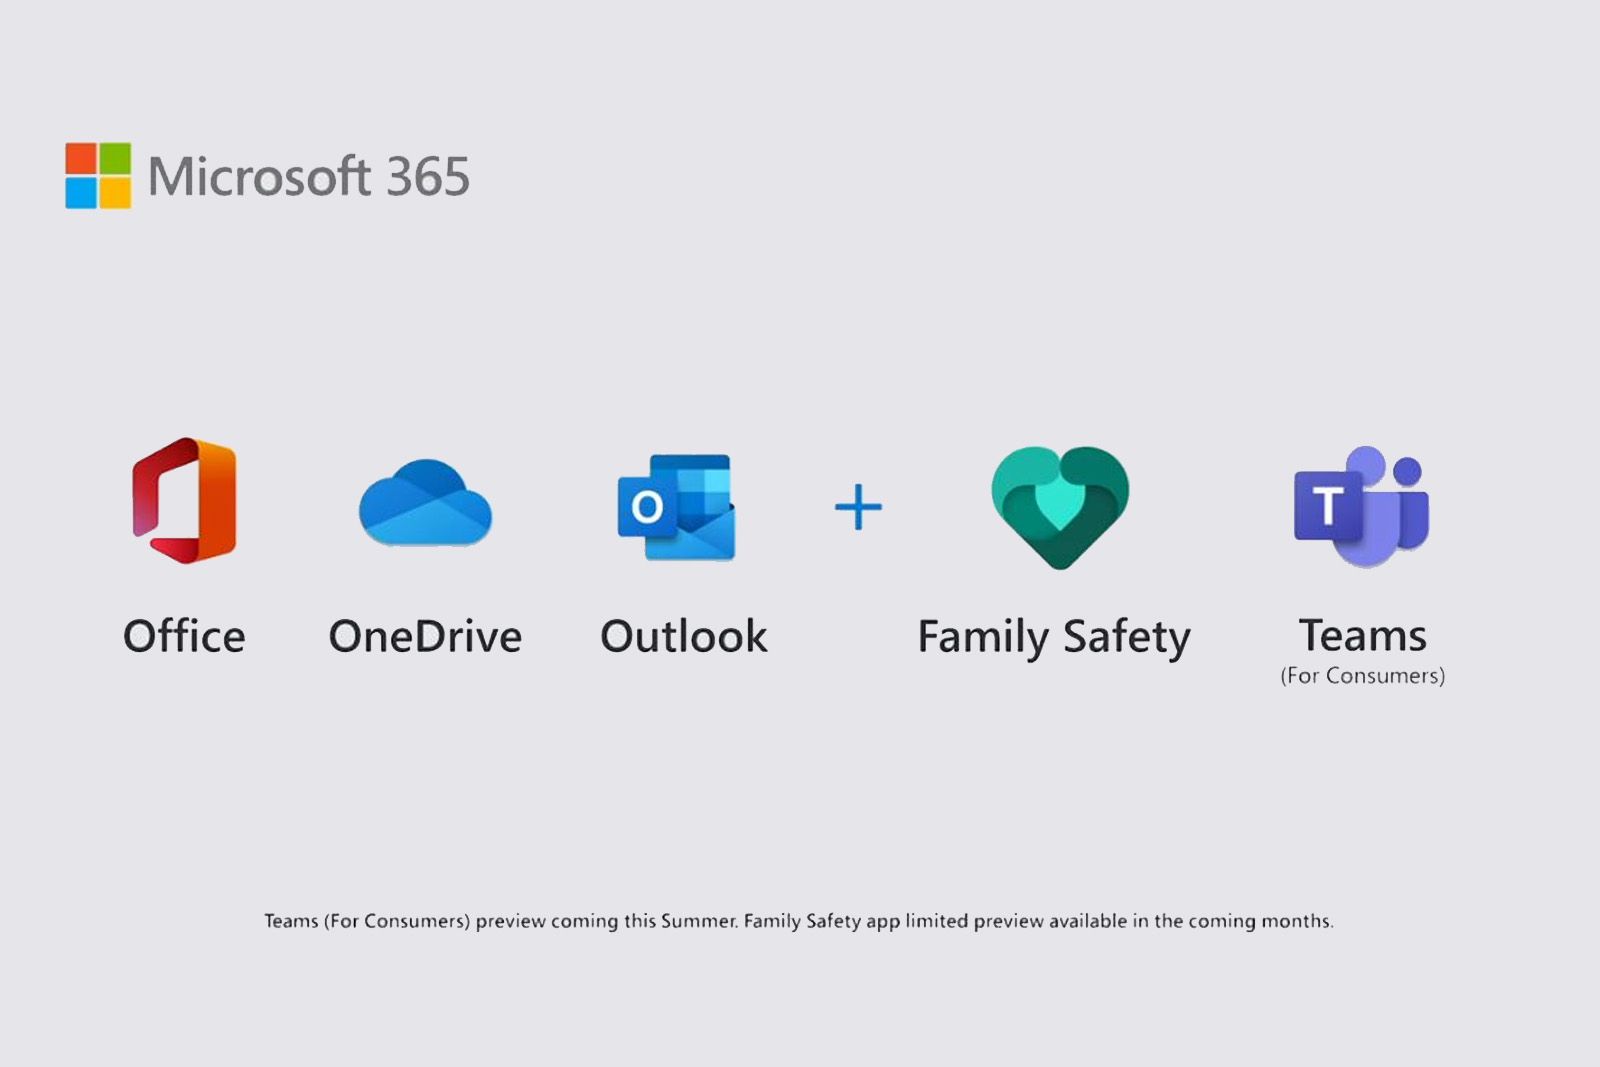 Microsoft Teams will be available for consumers soon image 1